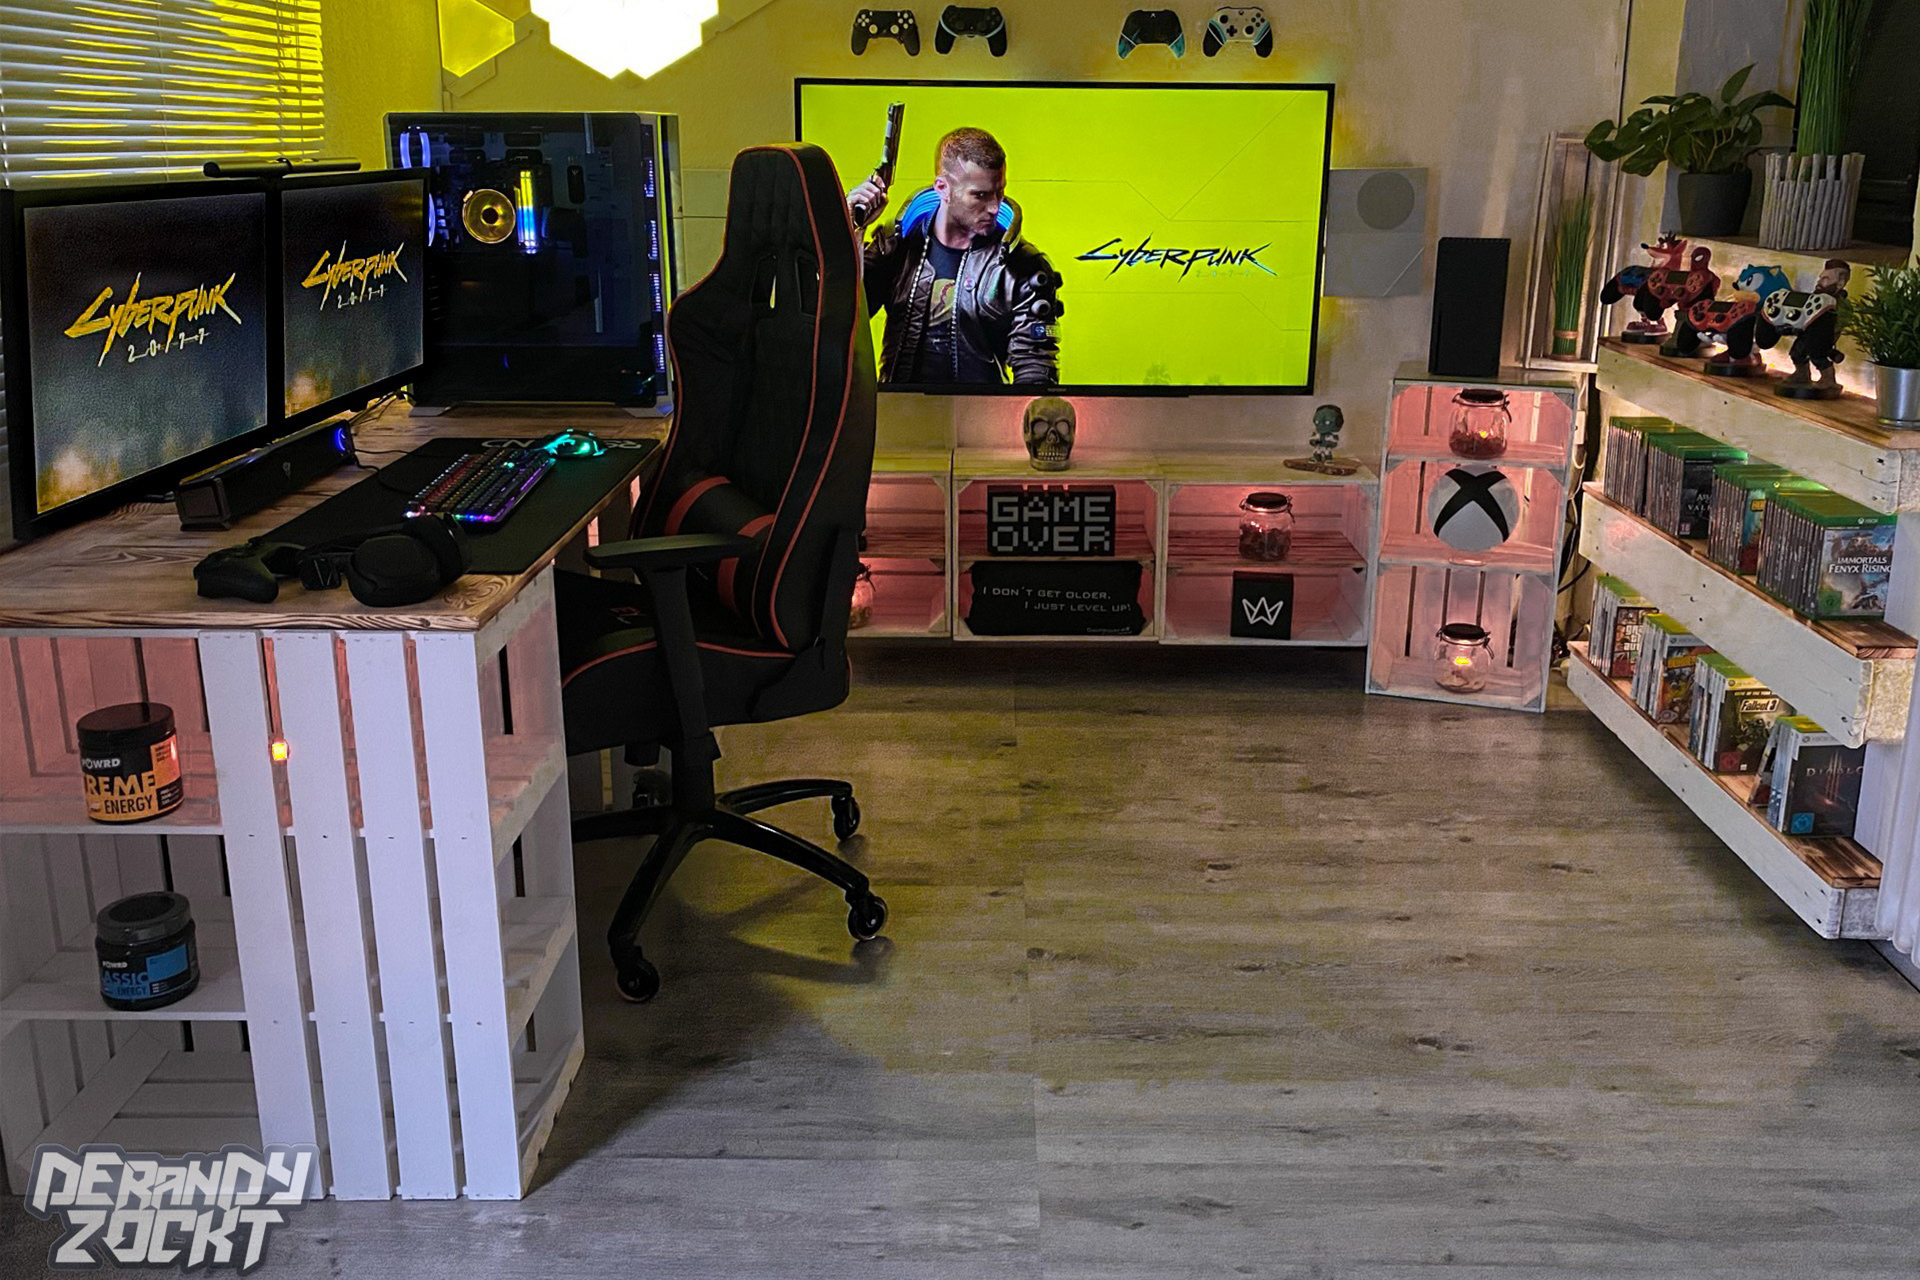 Amazing Gaming Room Ideas for 2023